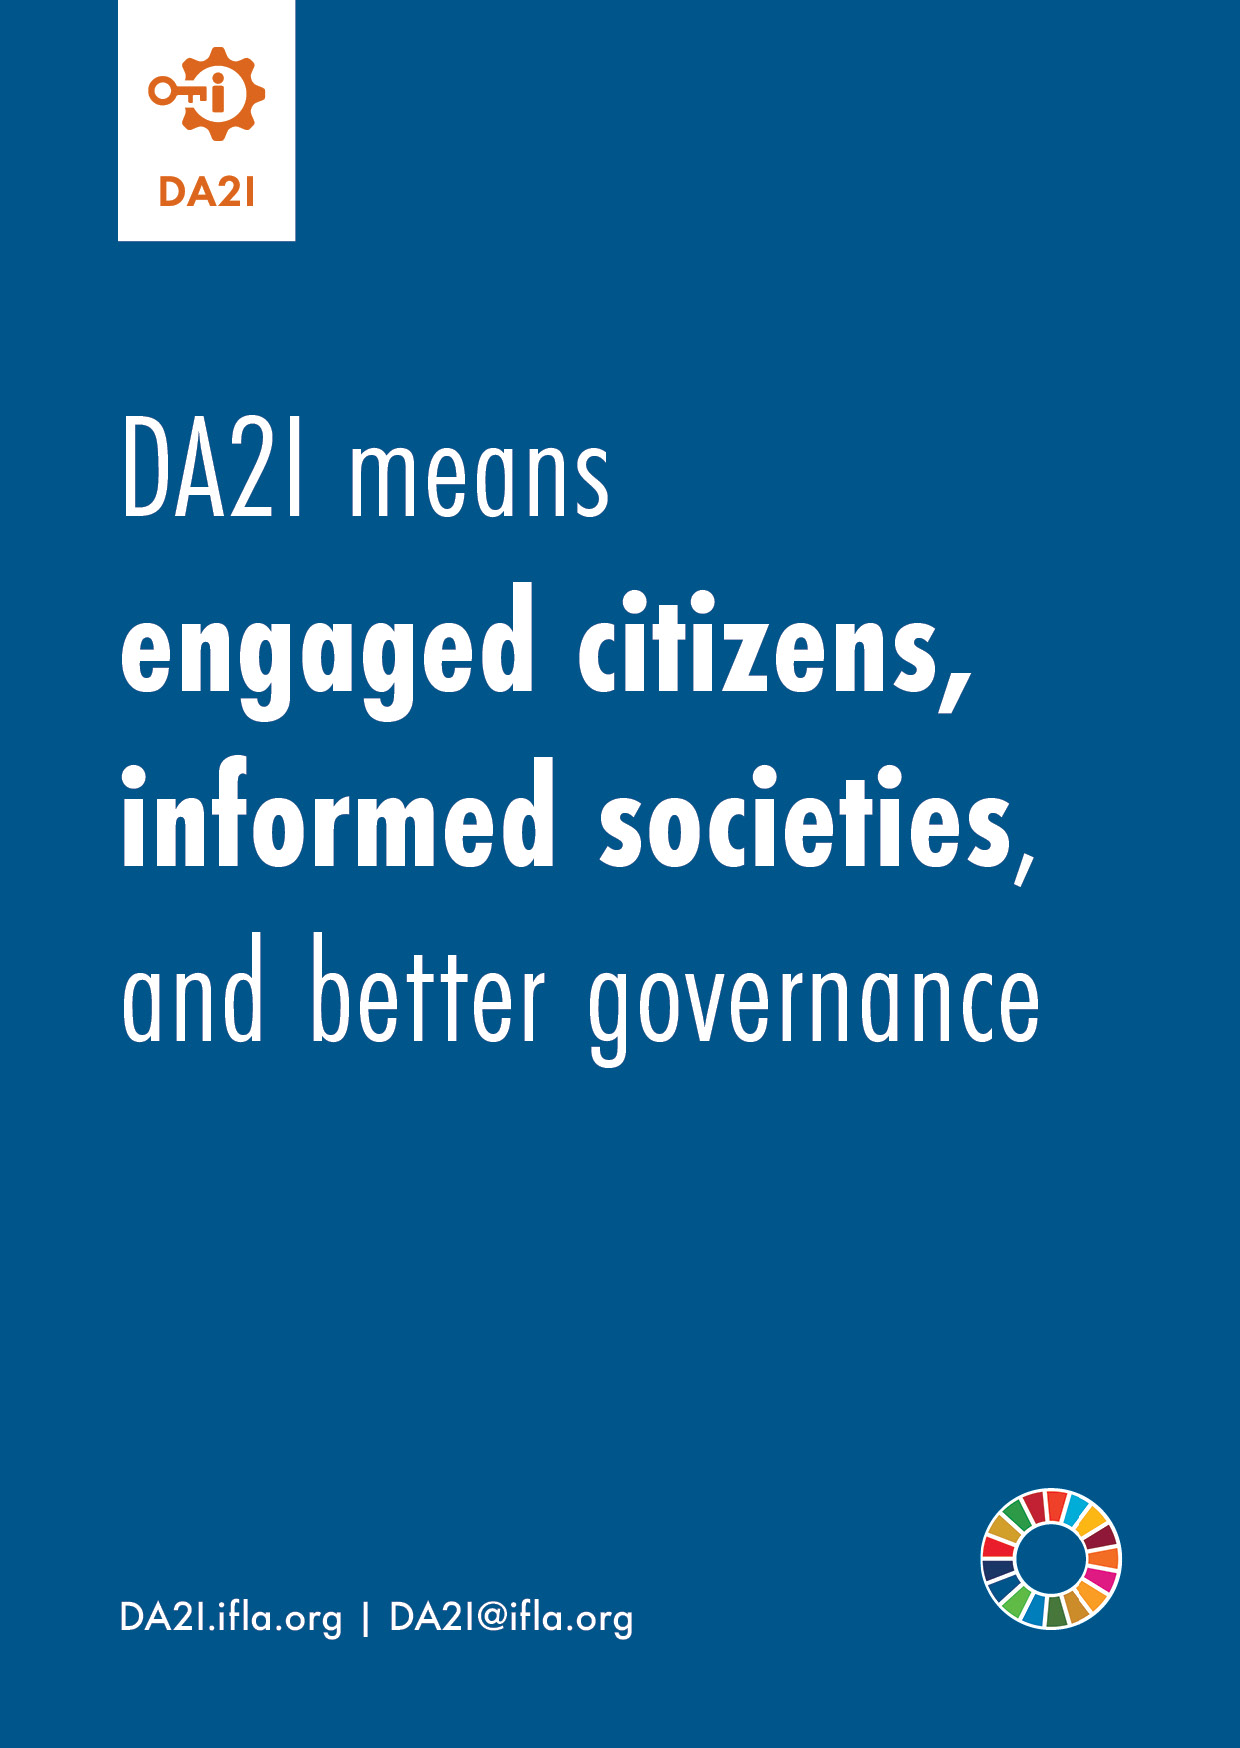 DA2I means engaged citizens, informed societies, and better governance